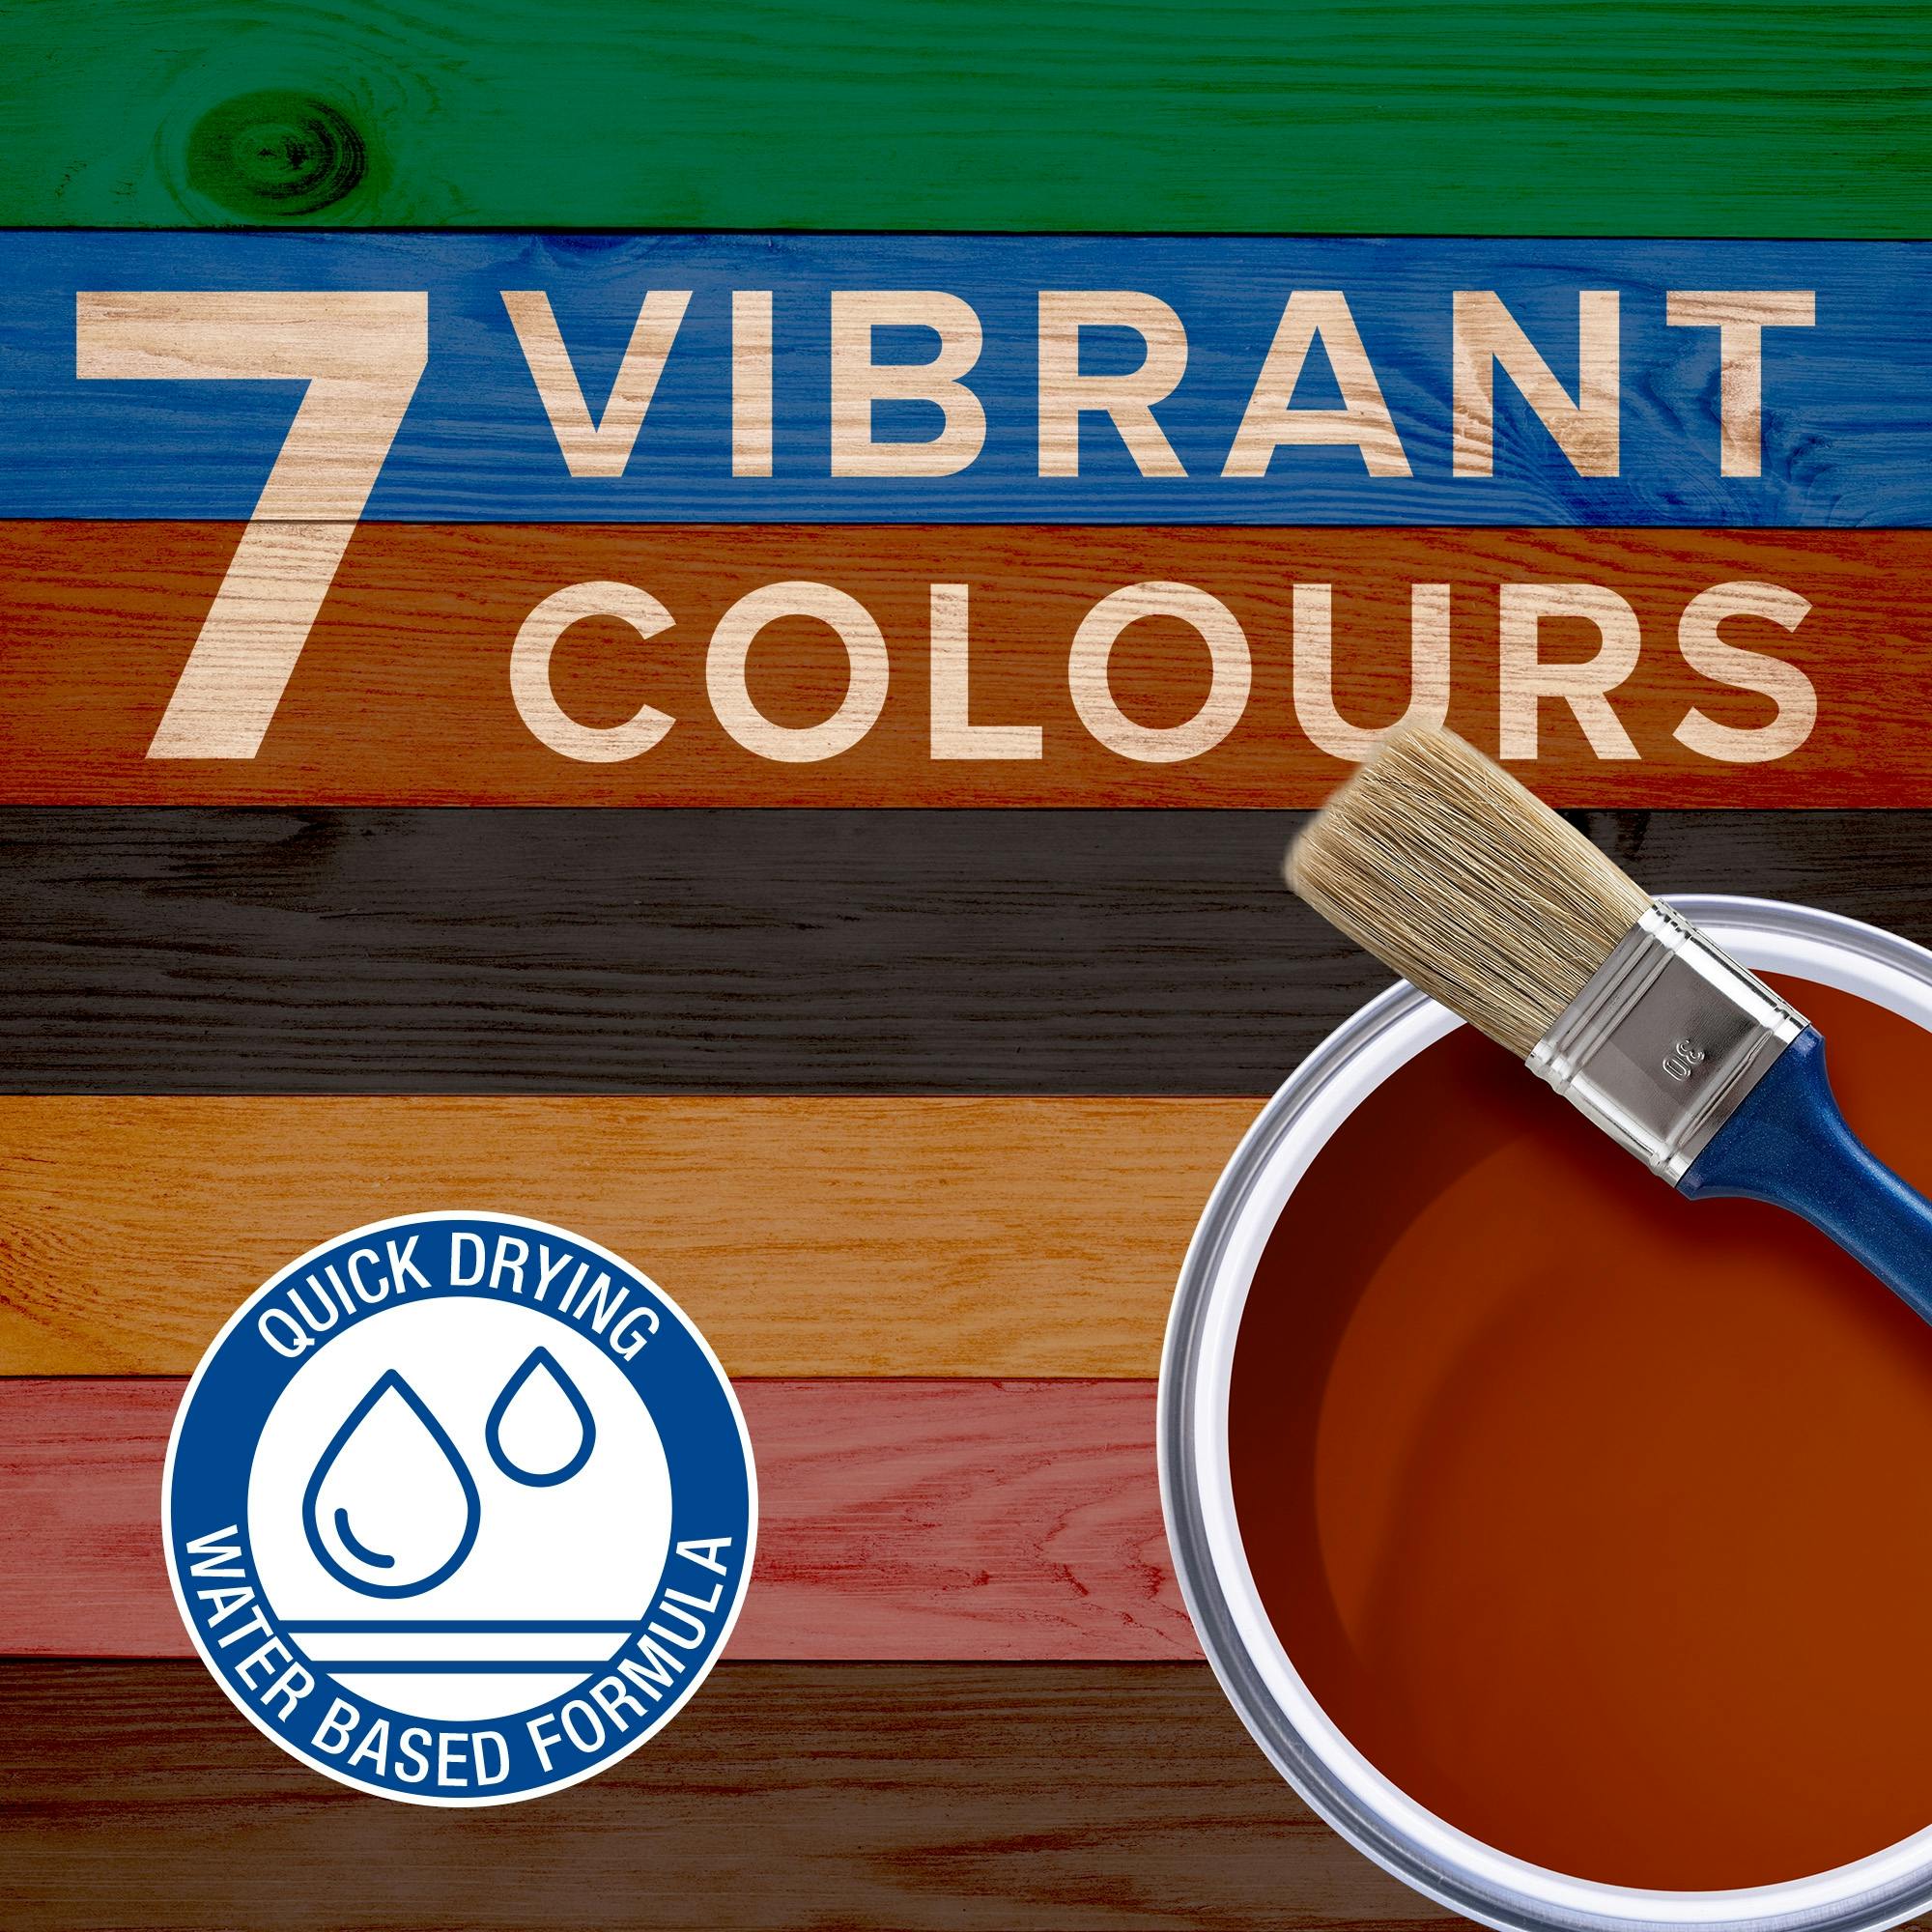 Choose from 7 vibrant shades